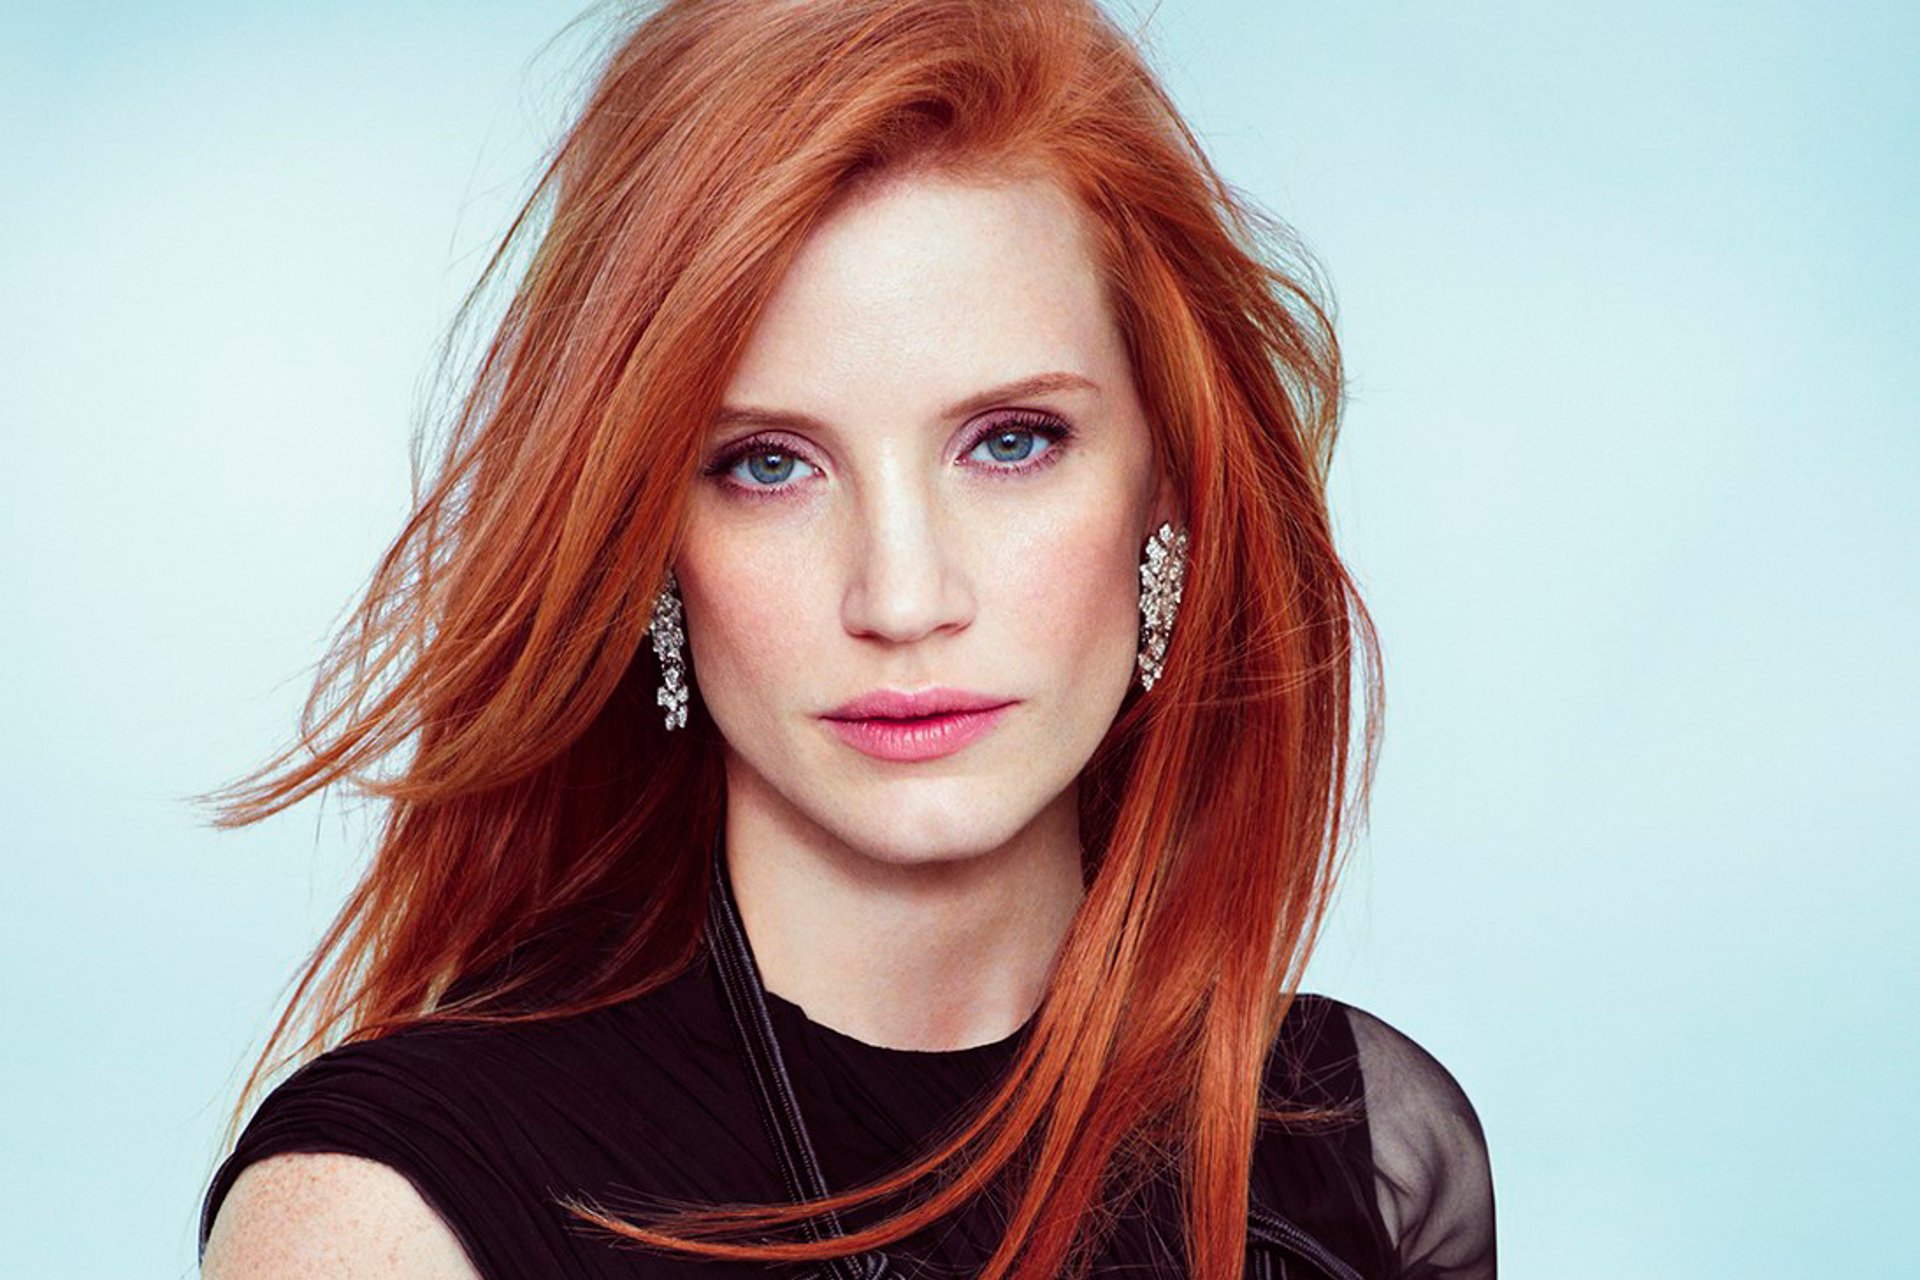 Download Earrings Face American Blue Eyes Redhead Actress Celebrity Jessica Chastain Hd Wallpaper 9957